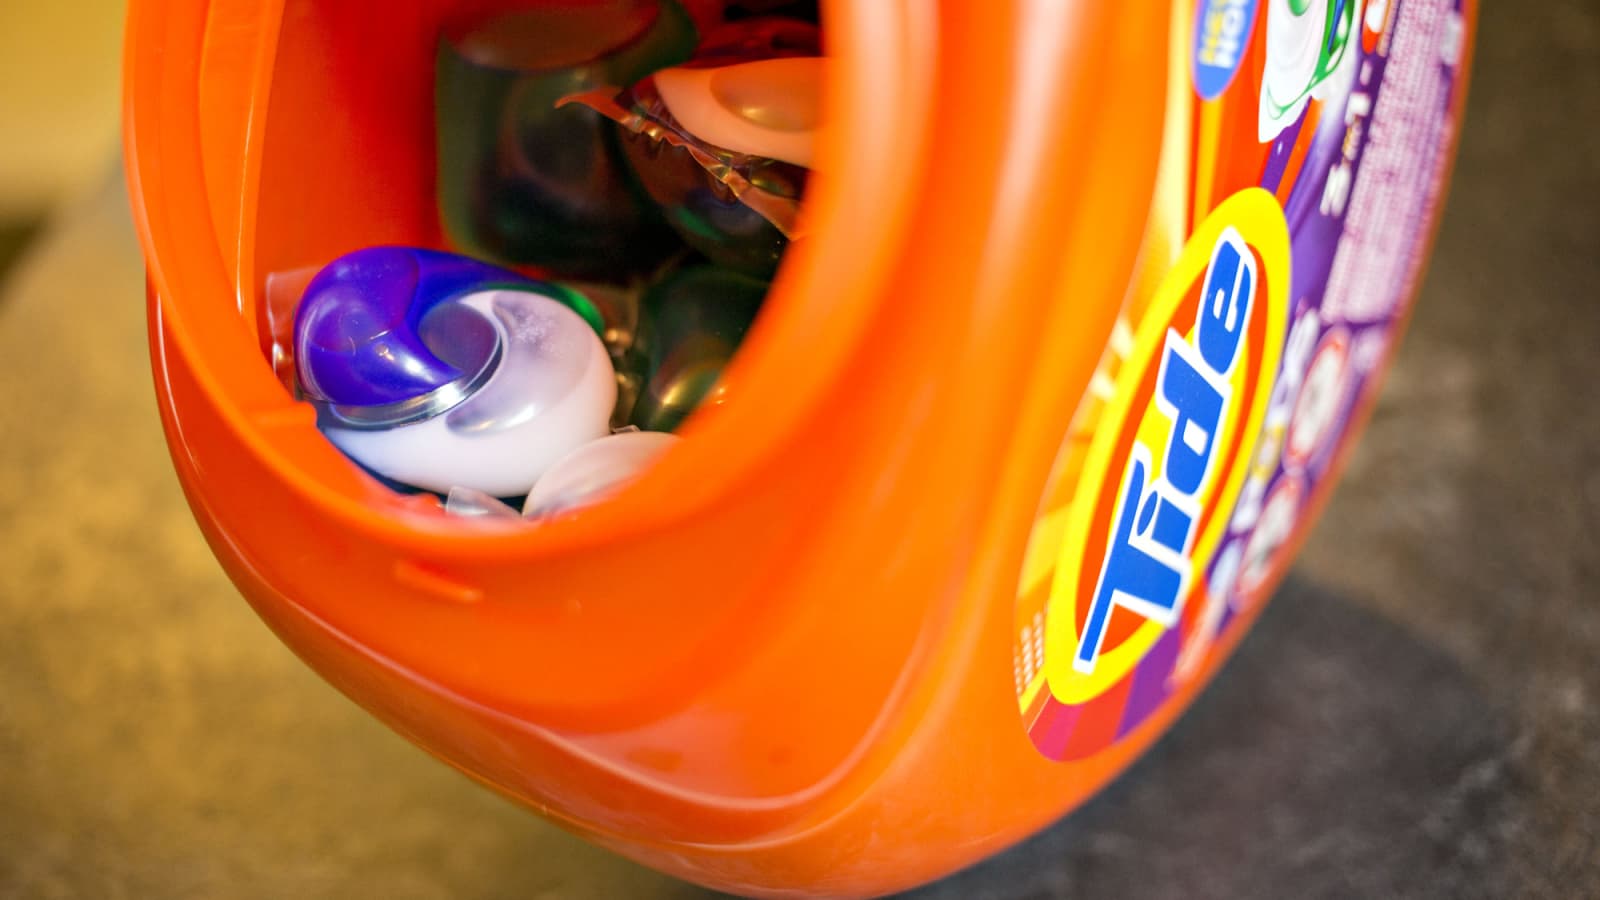 Tide Pods are being mentioned every 6 seconds on social media